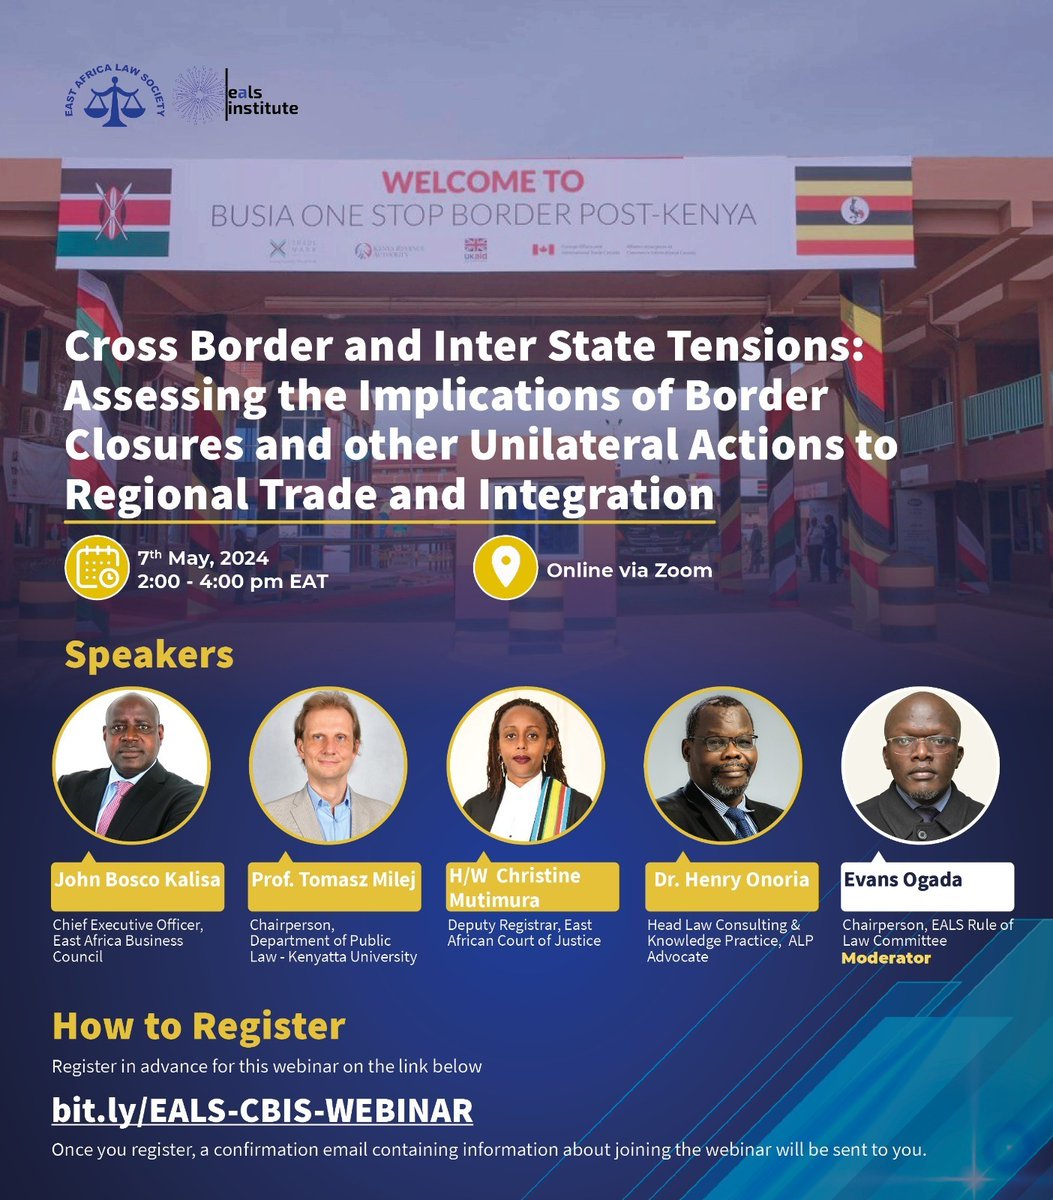 We are excited to announce that our Knowledge Partner, Dr. Henry Onoria will be speaking at @ealawsociety webinar on 'Cross Border and Inter state tensions' His participation adds on the previous deeds by ALP East Africa in supporting regional integration in East Africa.